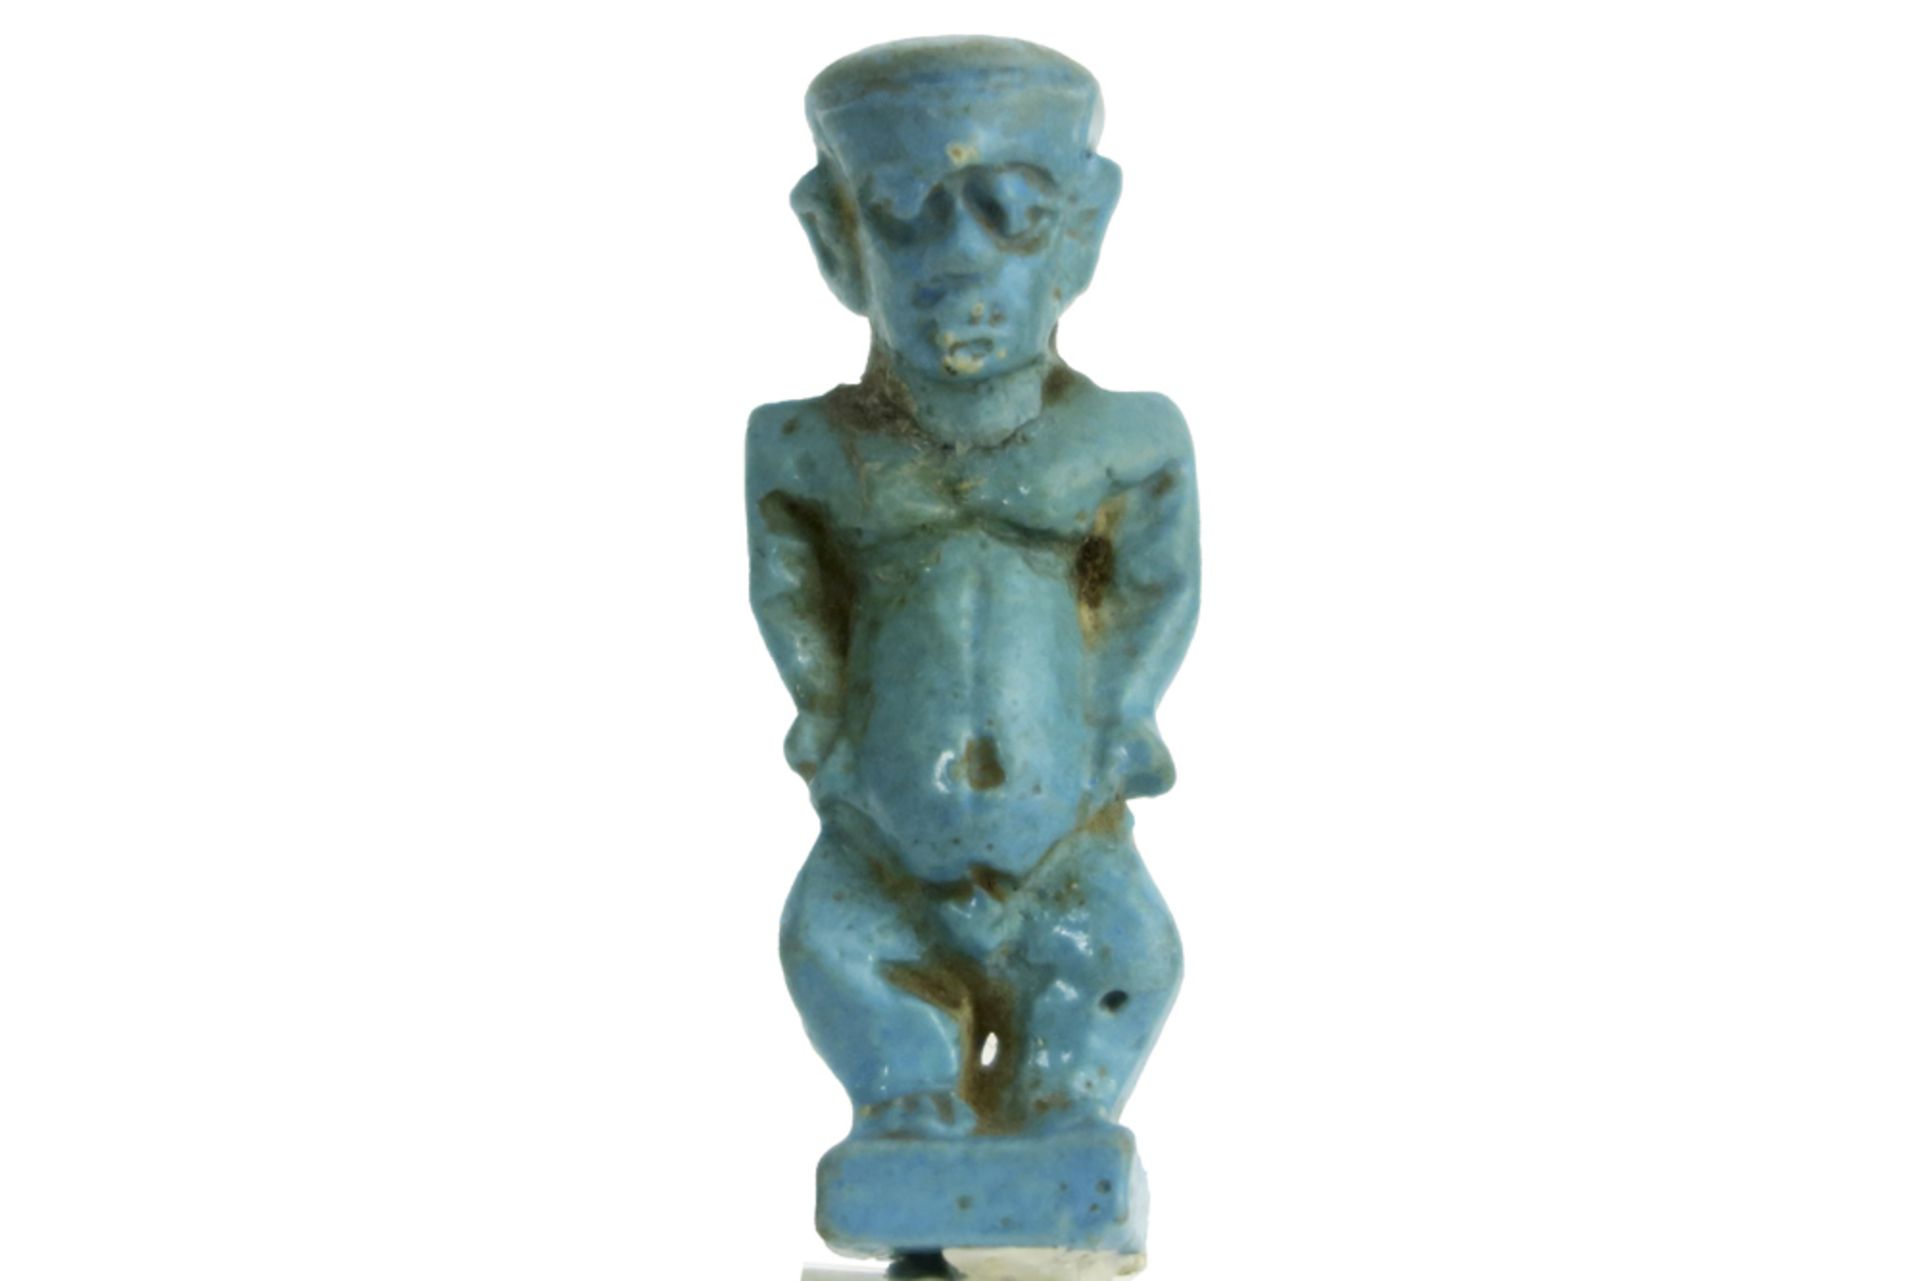 Ancient Egyptian 26th till 30th Dynasty "Ptah Patek" sculpture in ceramic || OUDE EGYPTE - 26ste tot